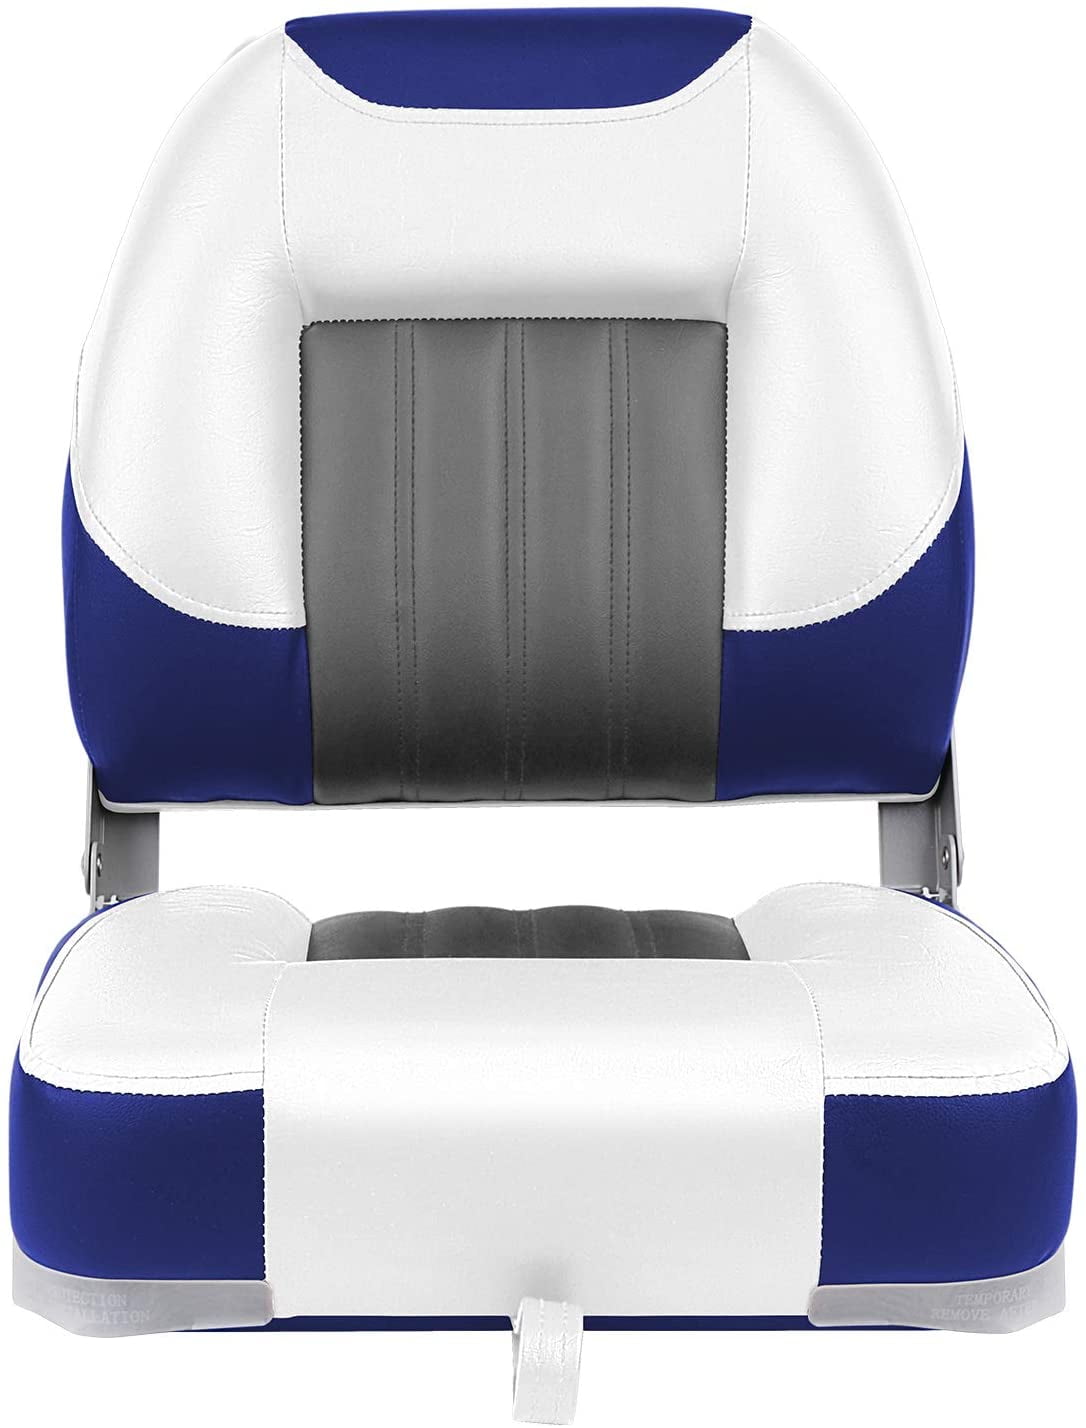 Leader Accessories New Low Back Folding Boat Seat, Blue